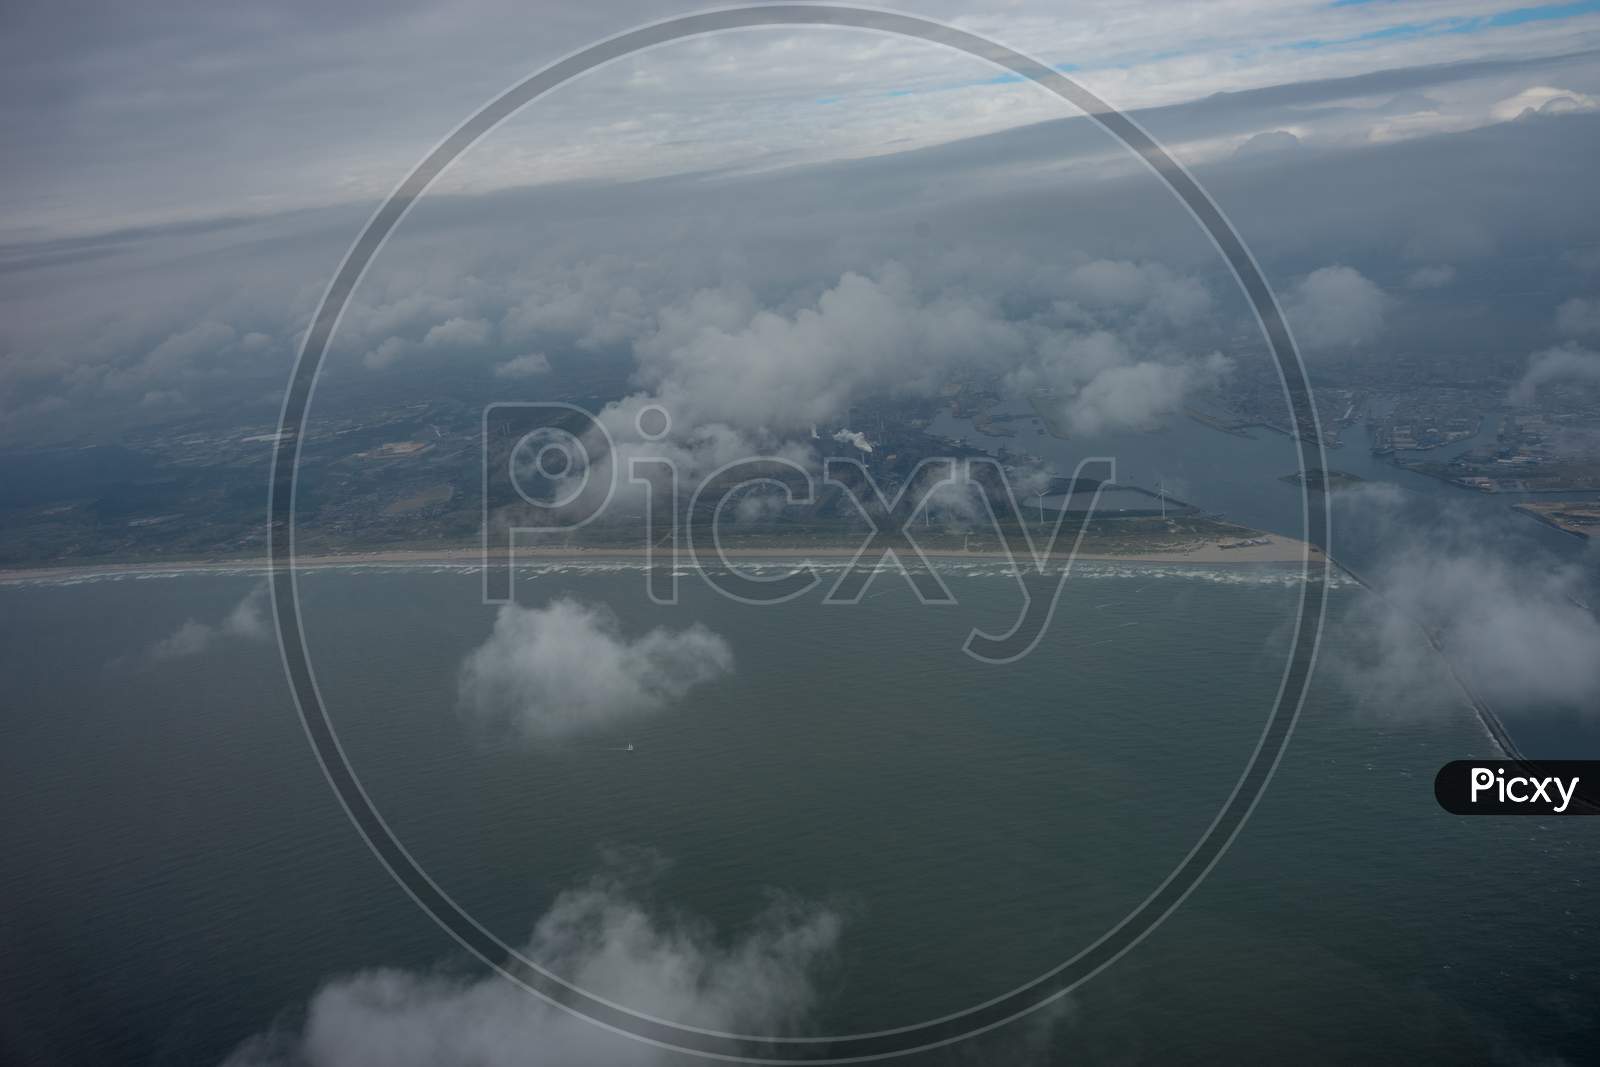 The Netherlands Coastline Viewed From The Sky From A Plane Window